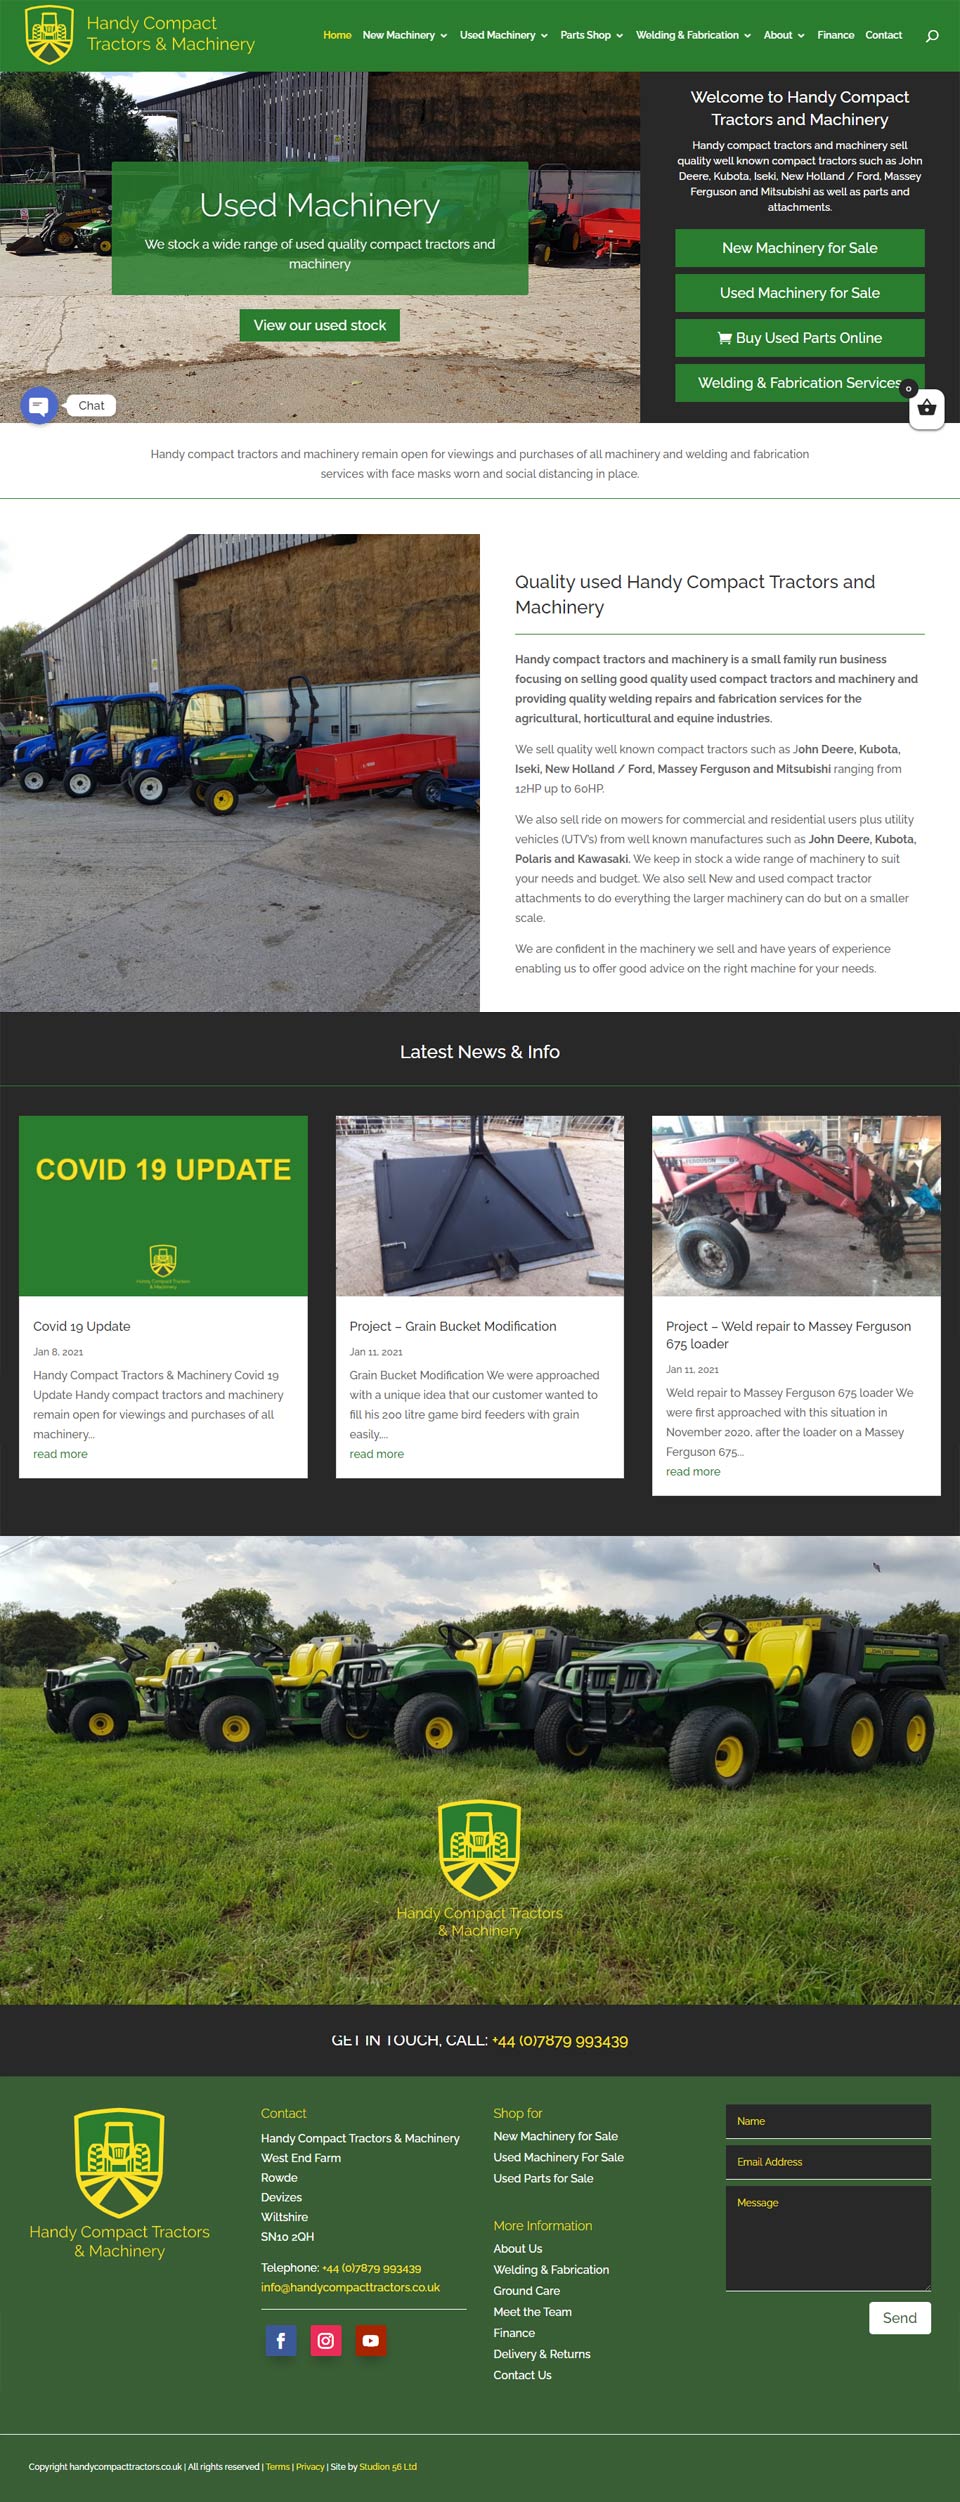 Handy Compact Tractors new website designed and developed by Studio 56